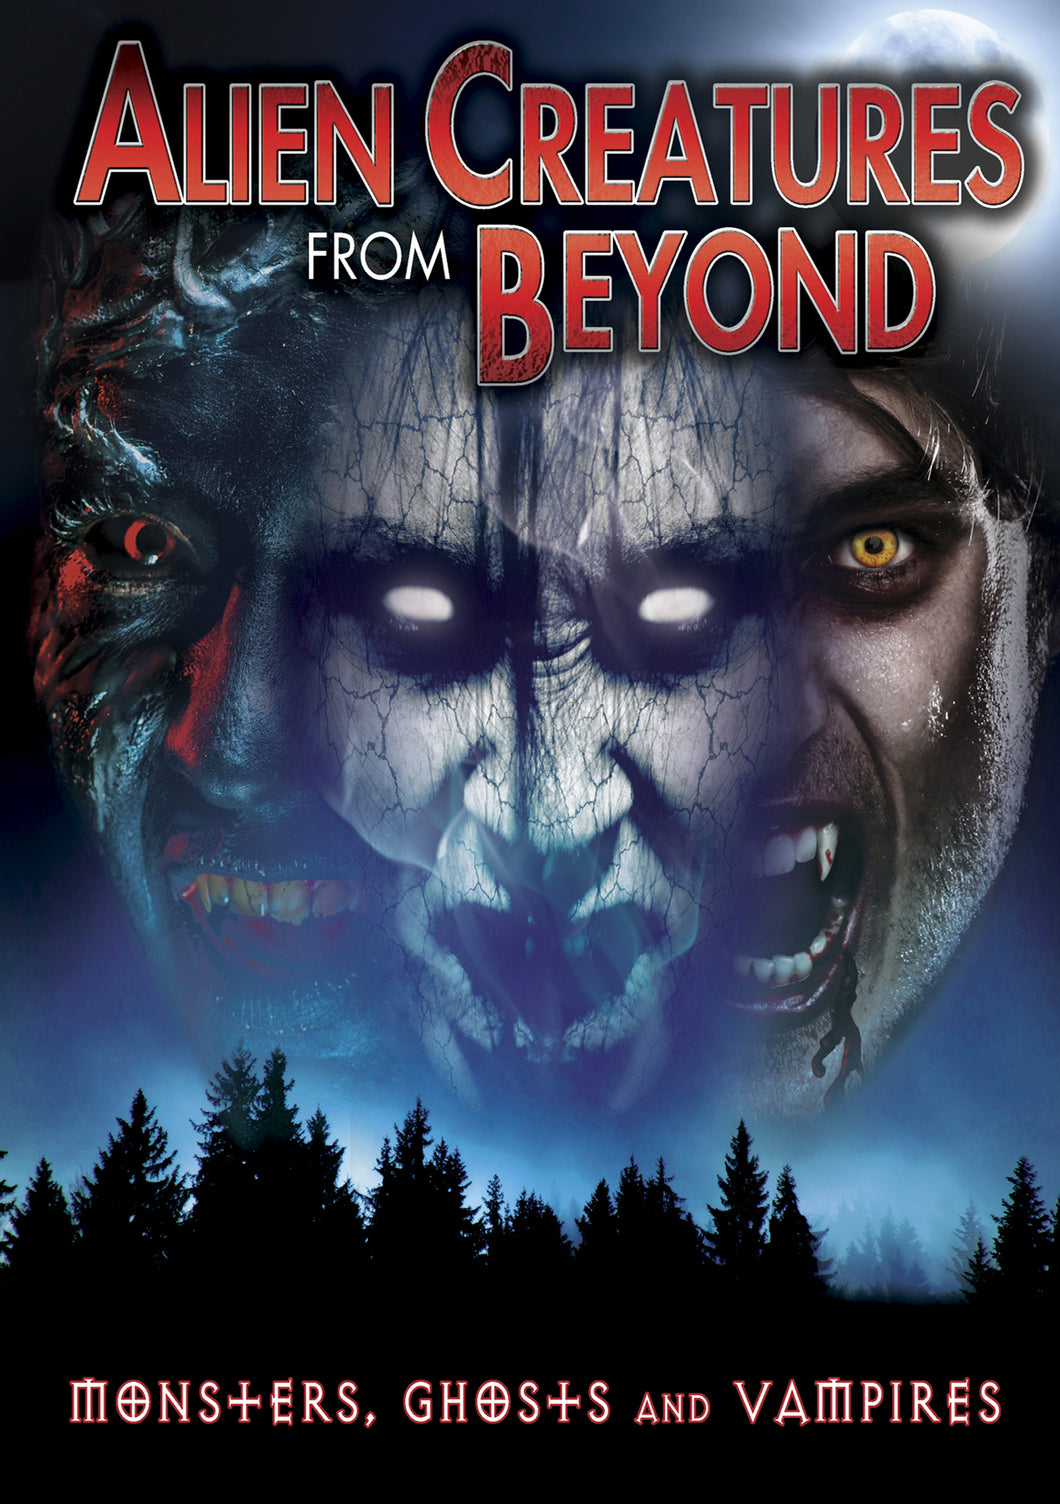 Alien Creatures From Beyond: Monsters, Ghosts And Vampires (DVD)